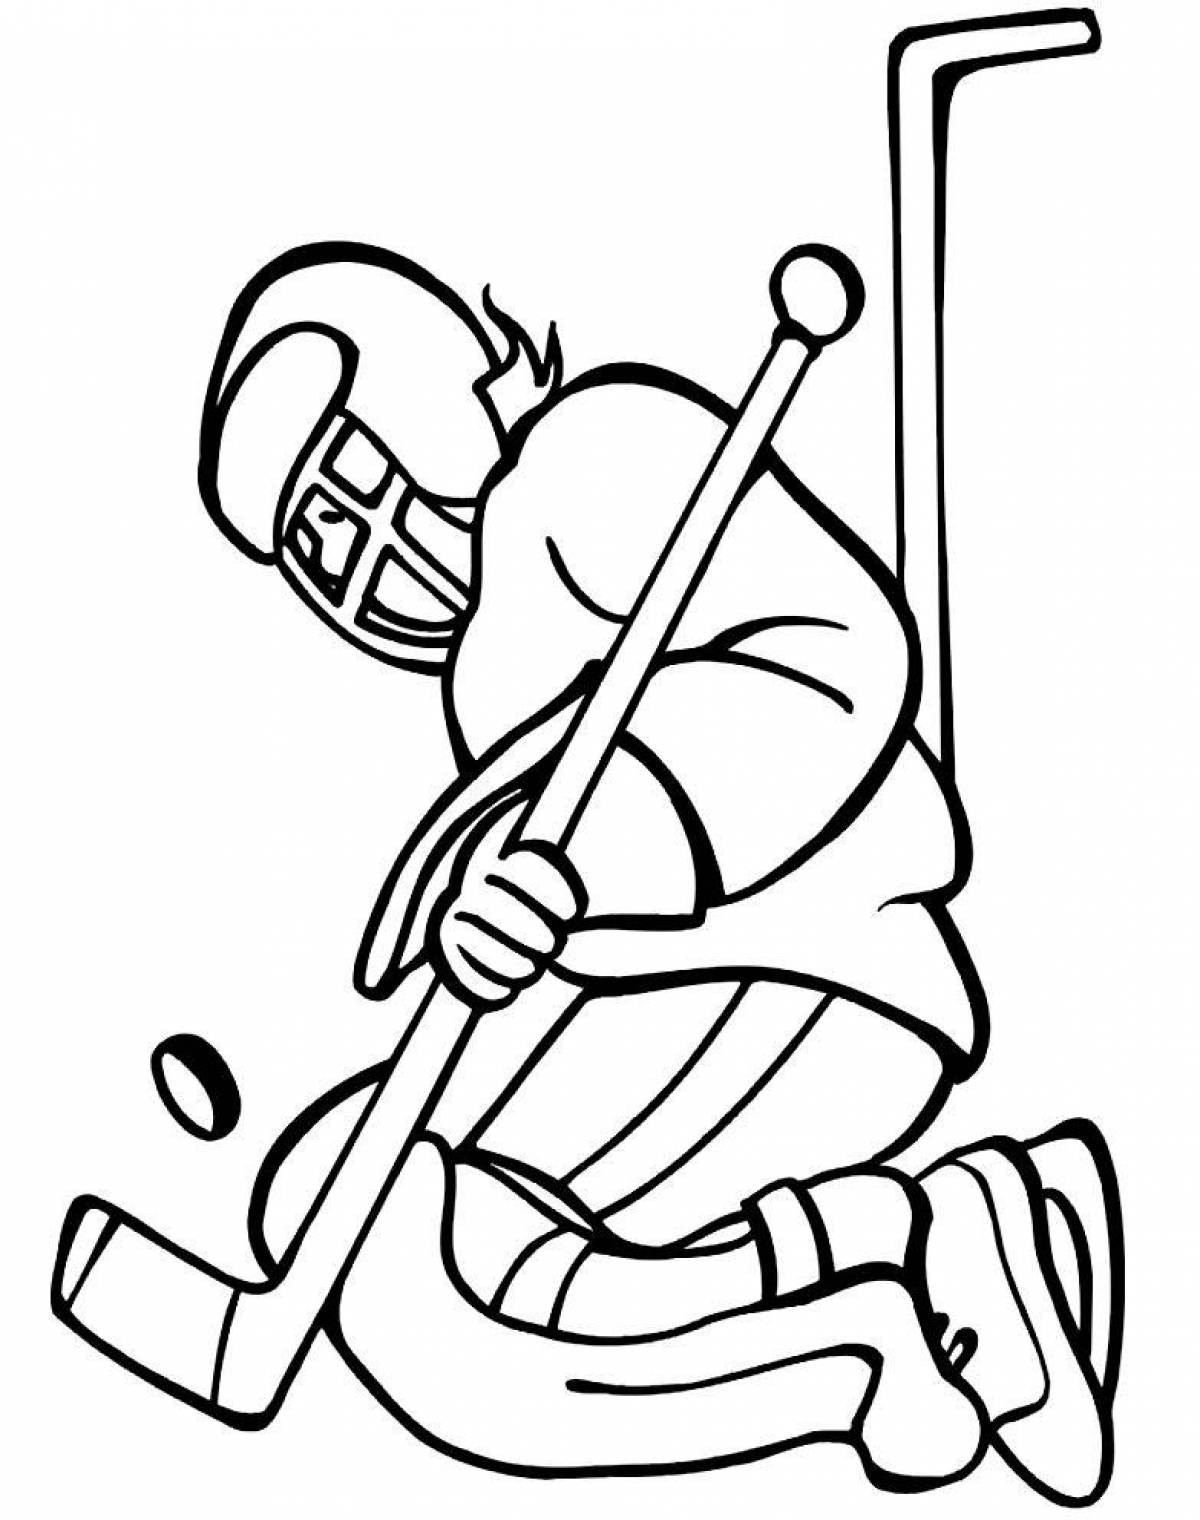 Glorious hockey player coloring page for kids